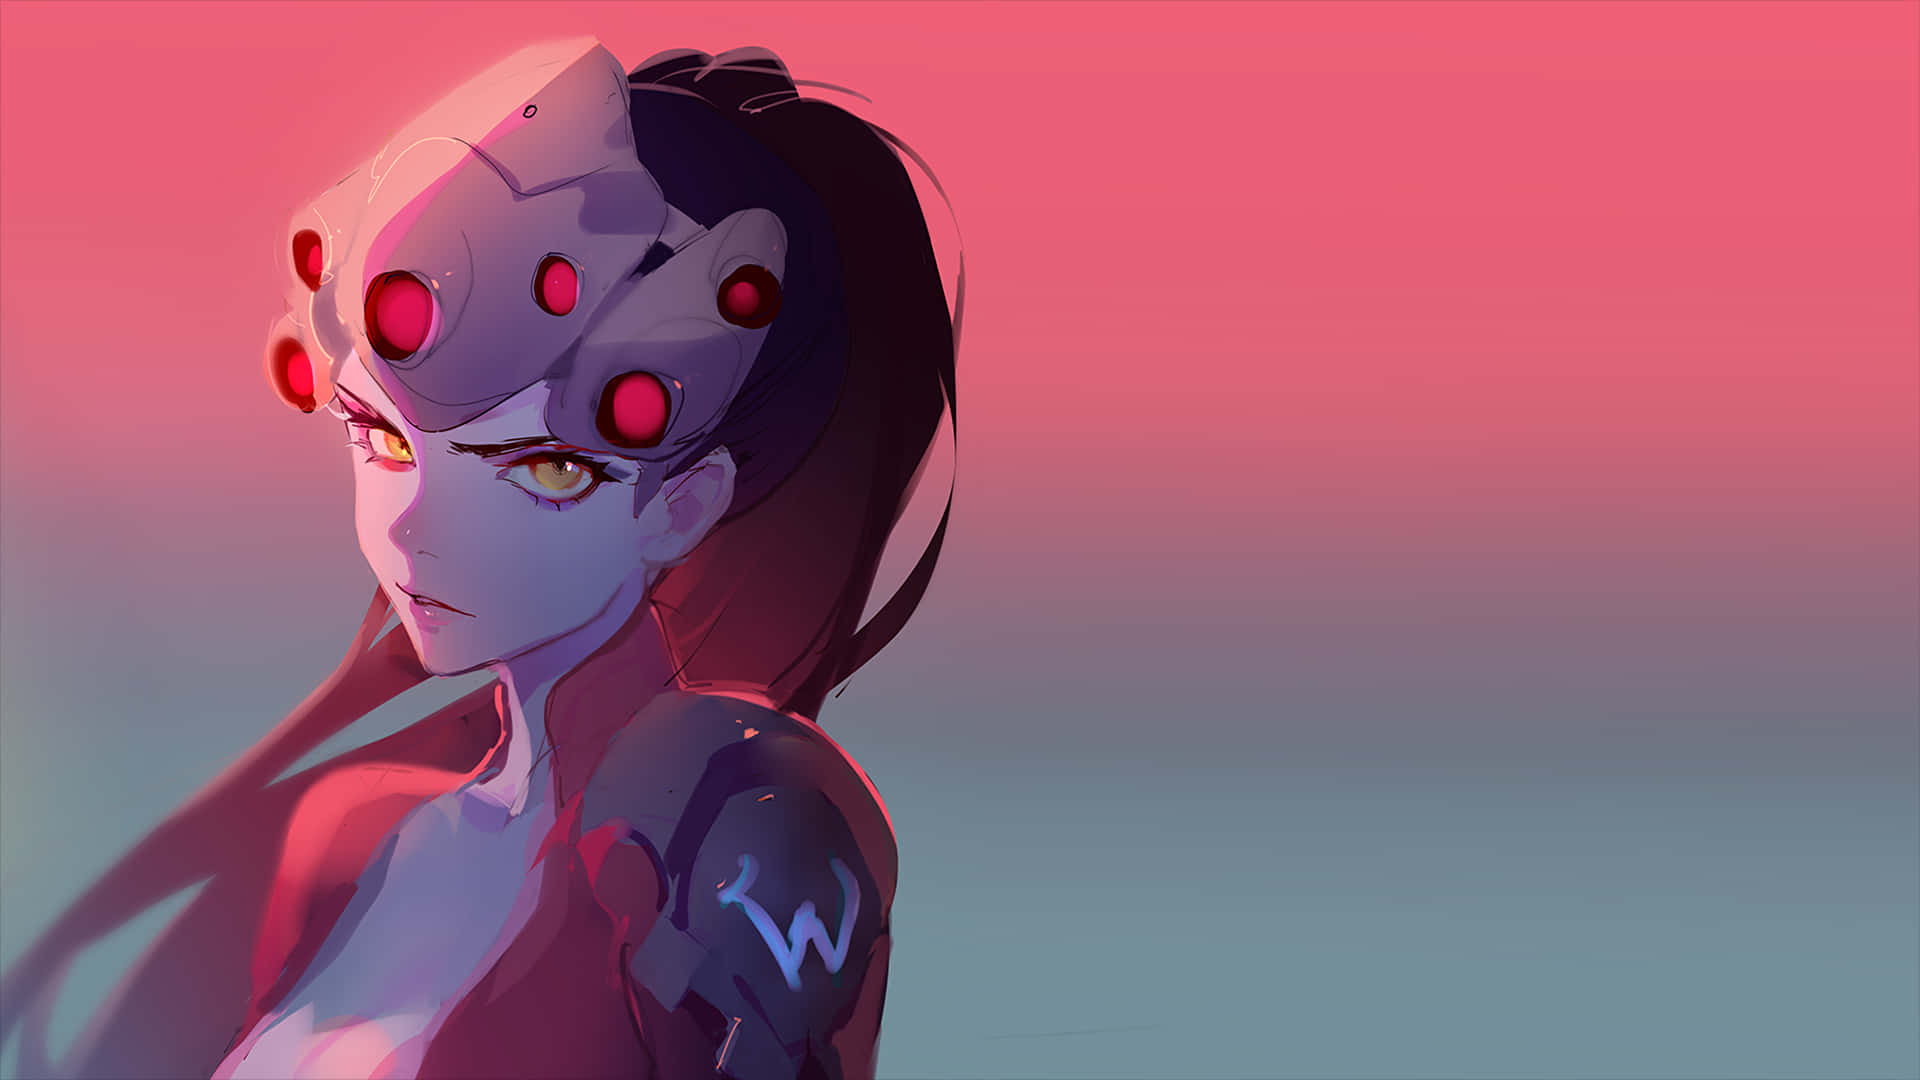 Dendödliga Widowmaker Har Overwatch I Sikte. (assuming The Sentence Is Referring To A Themed Wallpaper Featuring The Character Widowmaker From The Game Overwatch) Wallpaper